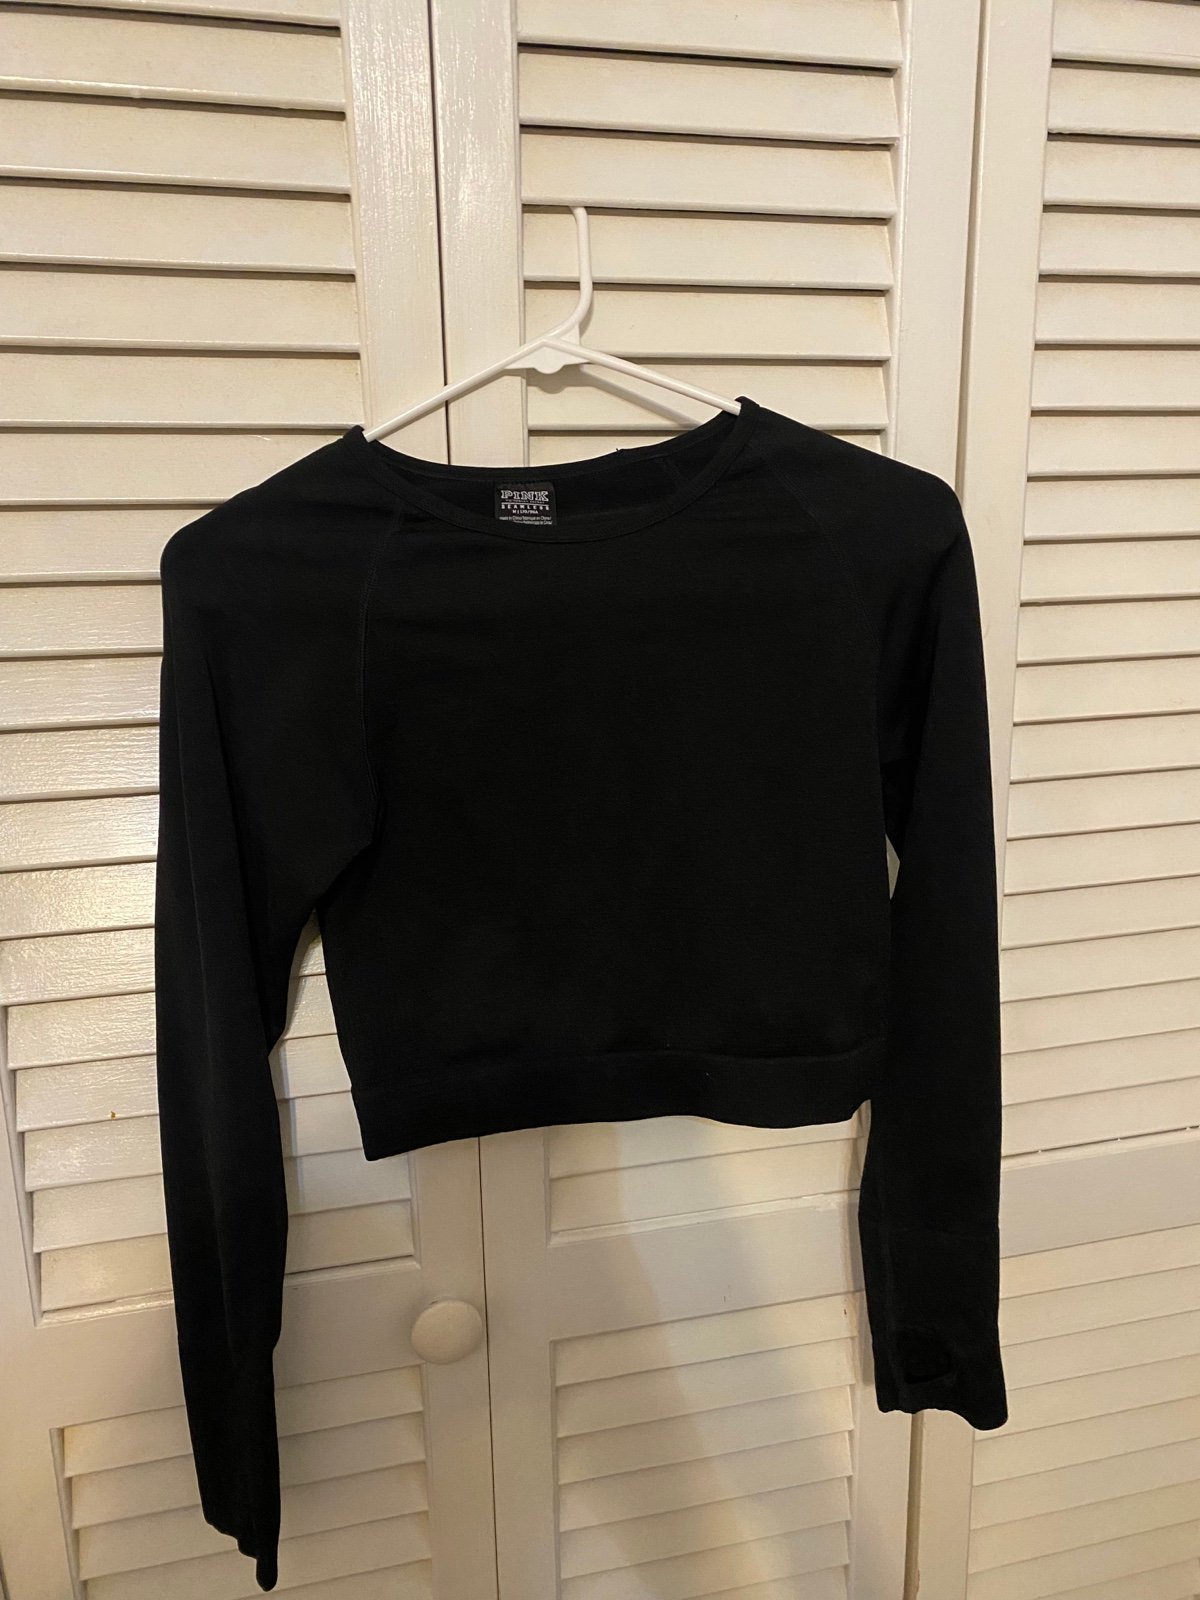 Special offer  Long Sleeve Crop top izHn64pX8 Buying Cheap